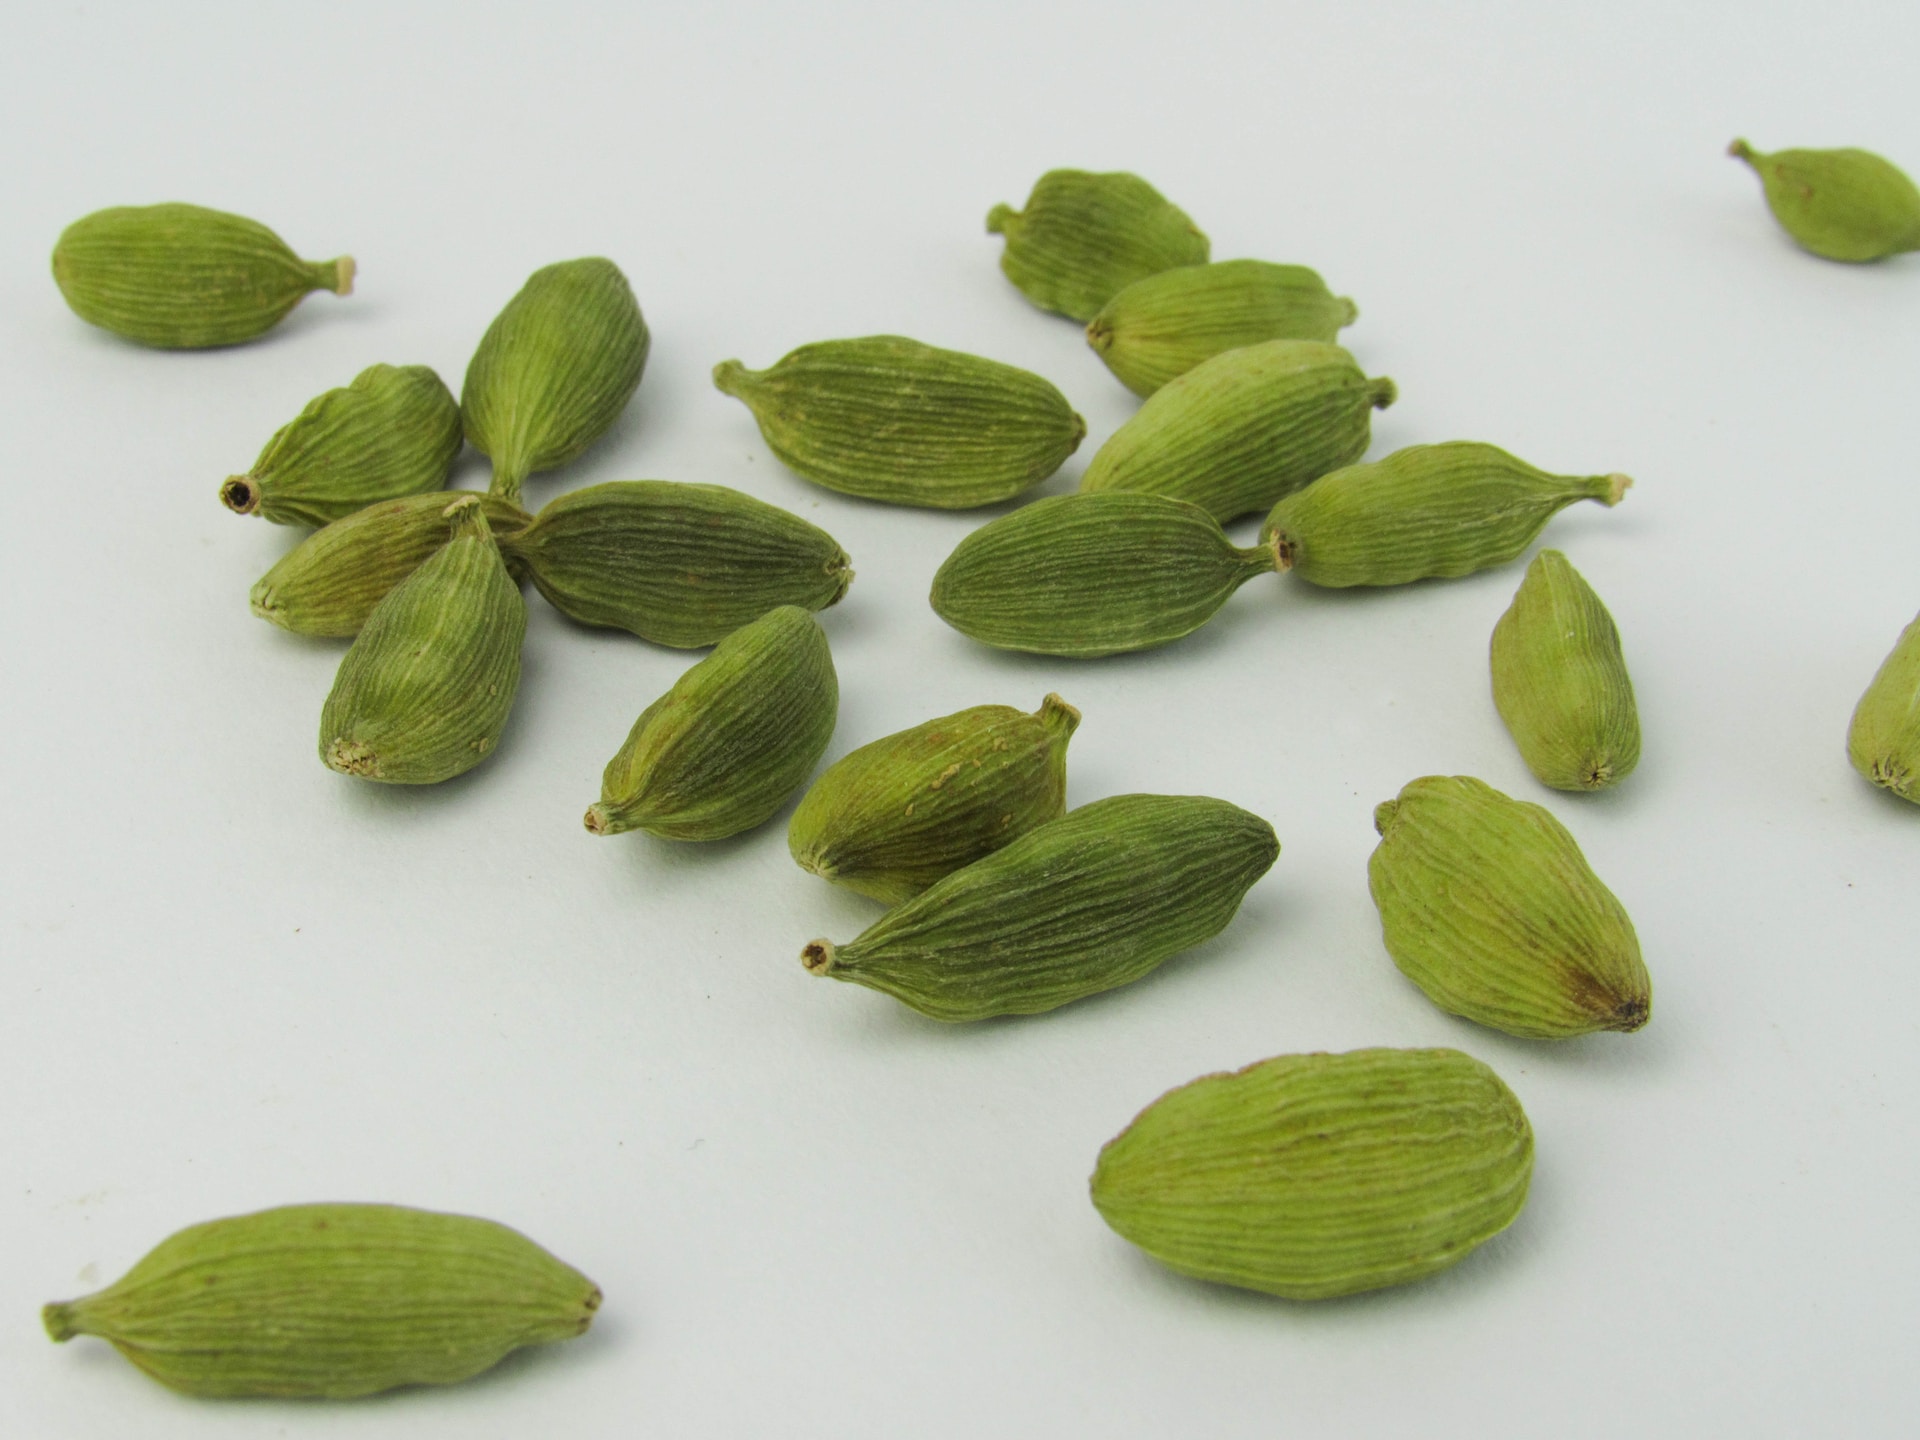 Why is Cardamom so Expensive?